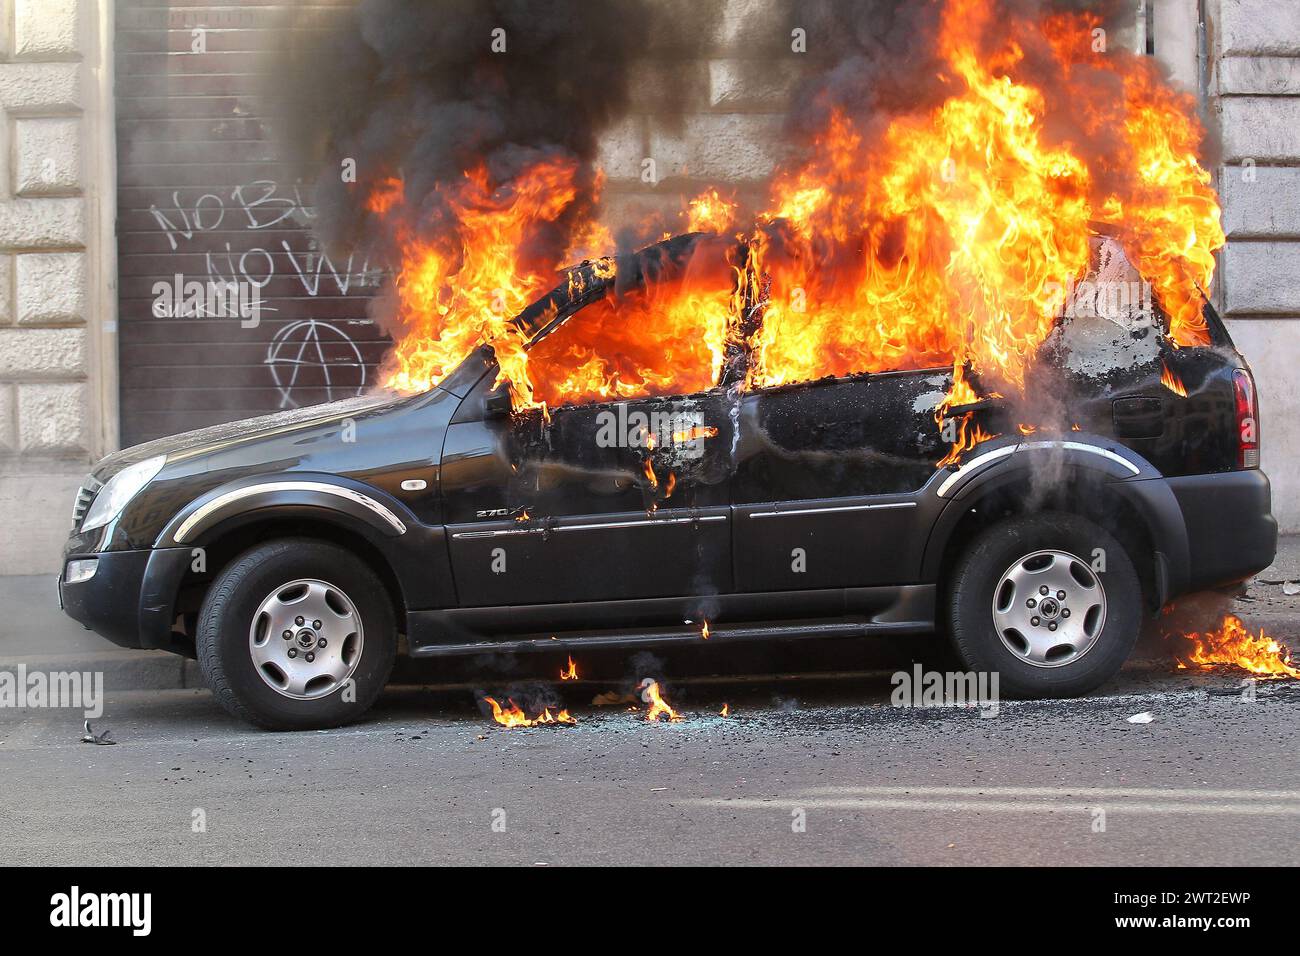 A car burned by the Black Bloc during an event in Rome Stock Photo